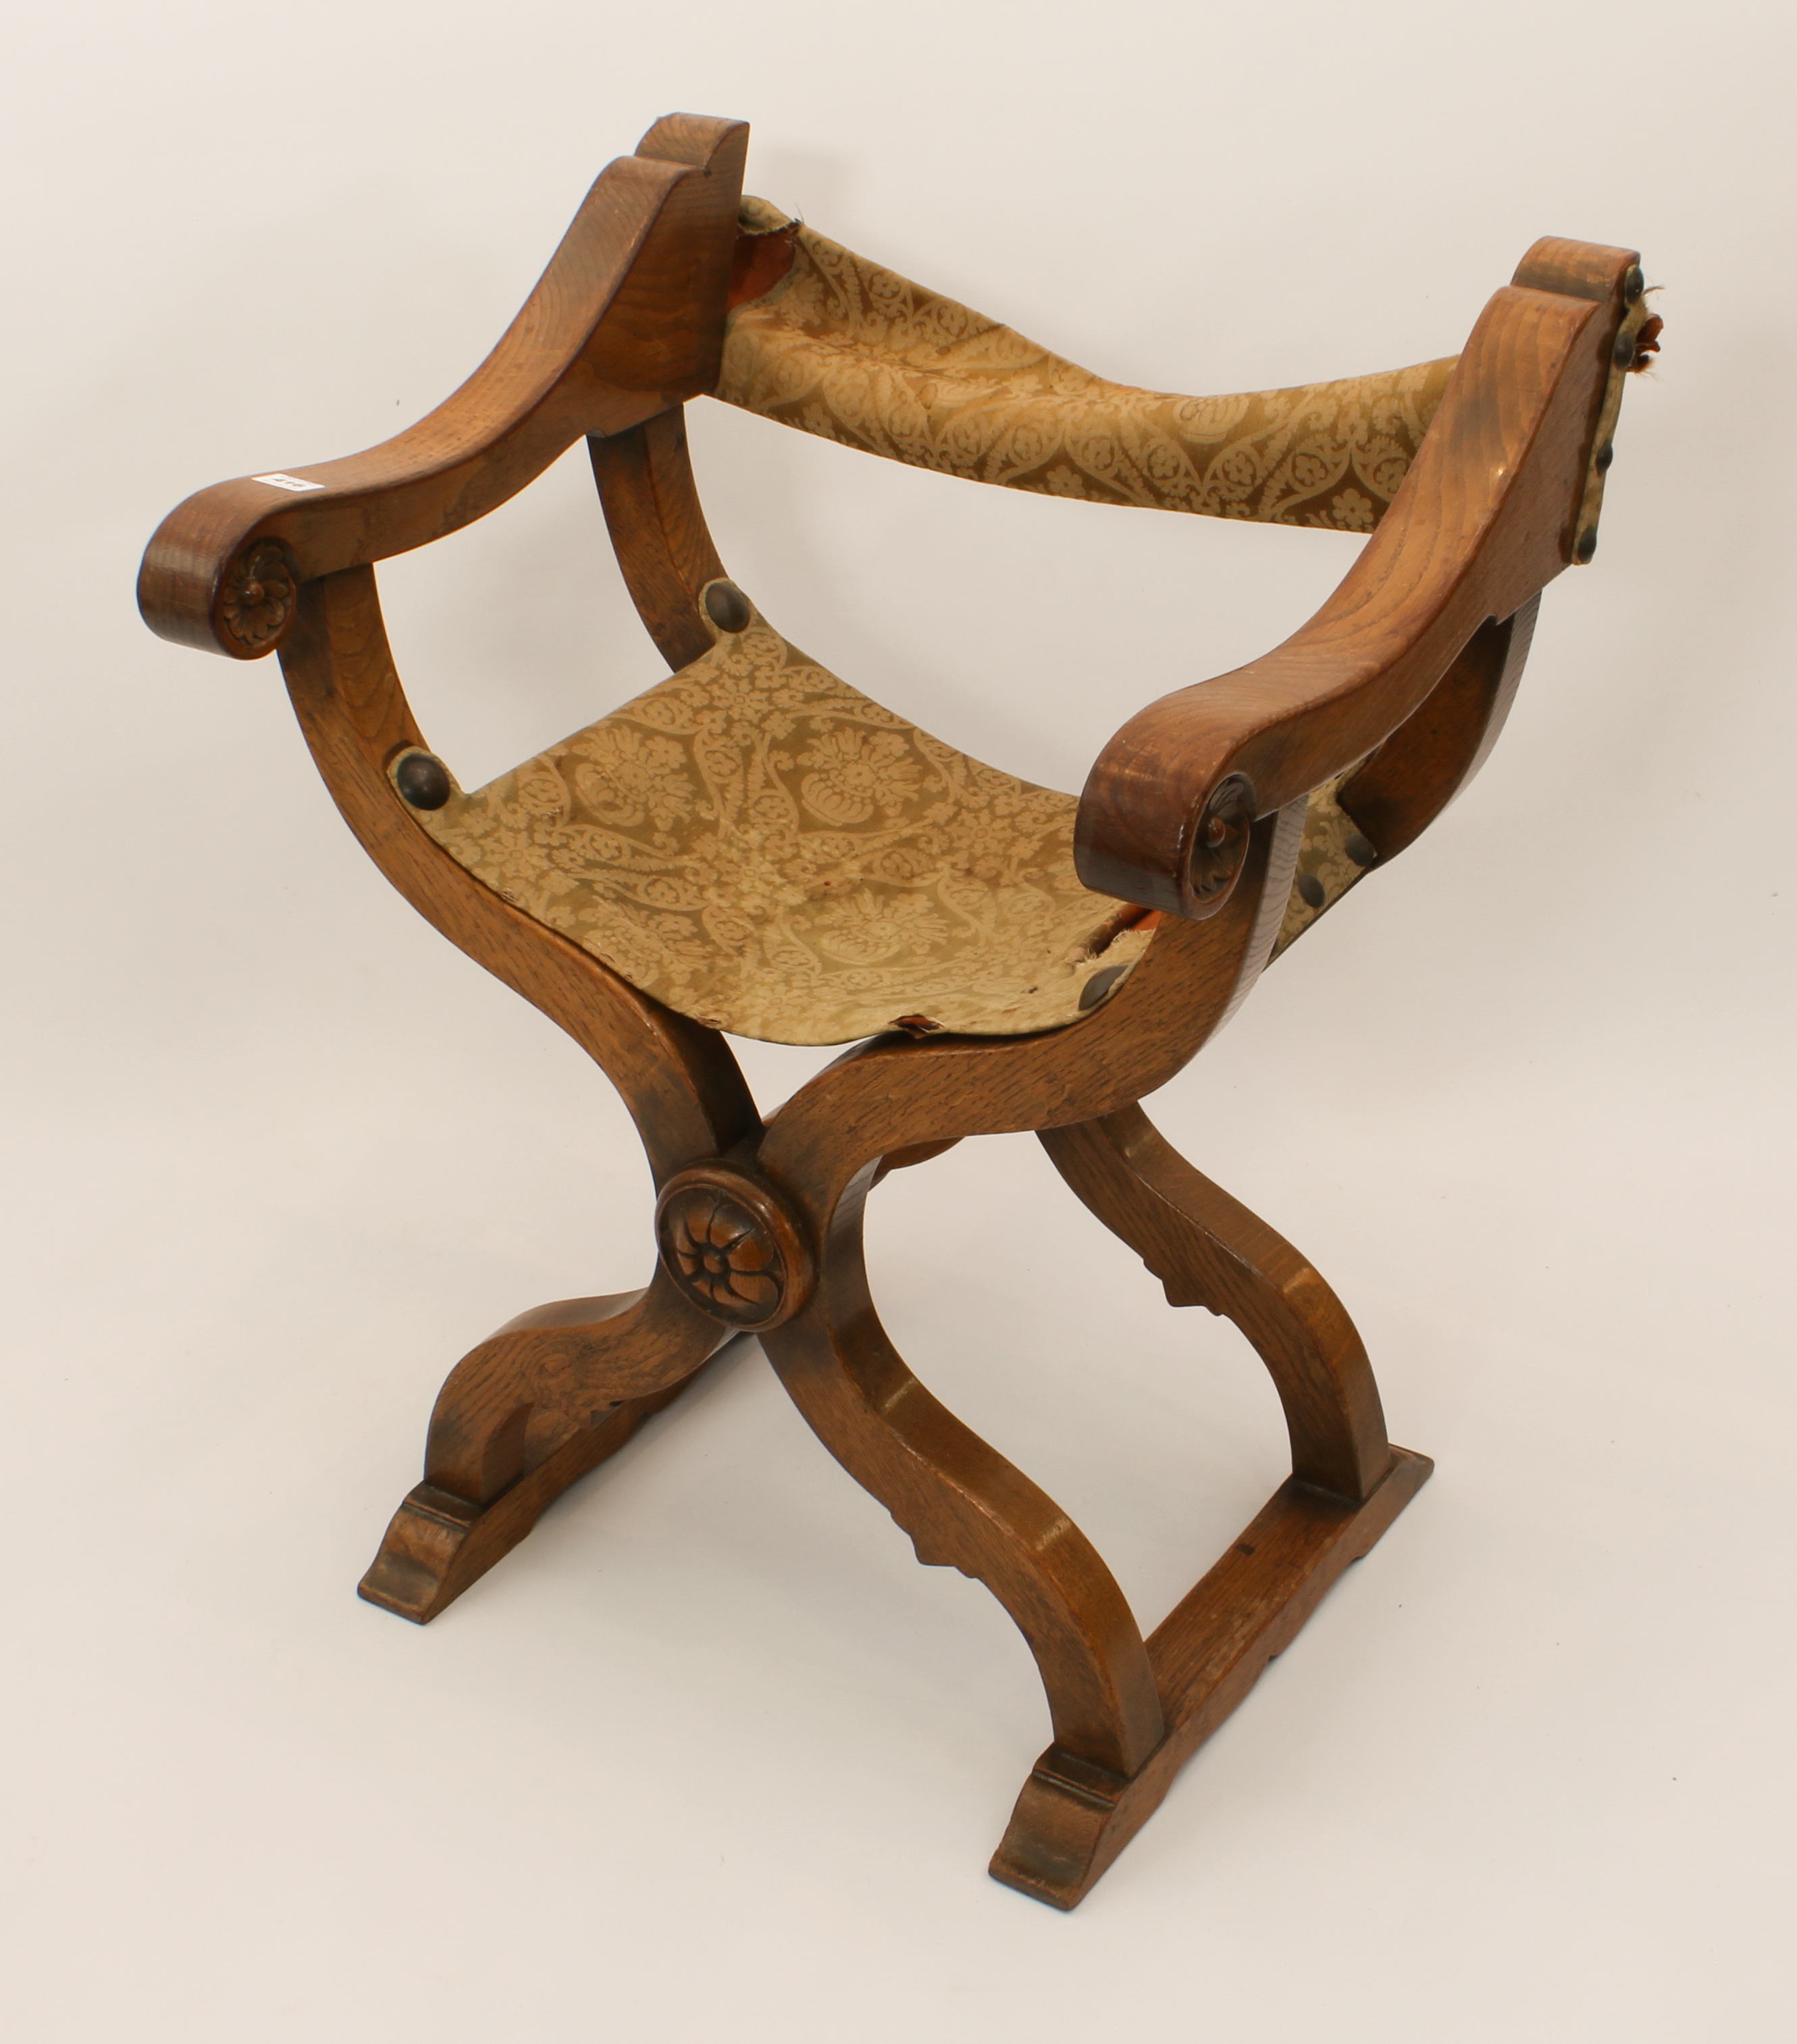 A late 19th century mid-oak and leather x-framed chair - the leather back and slung seat covered